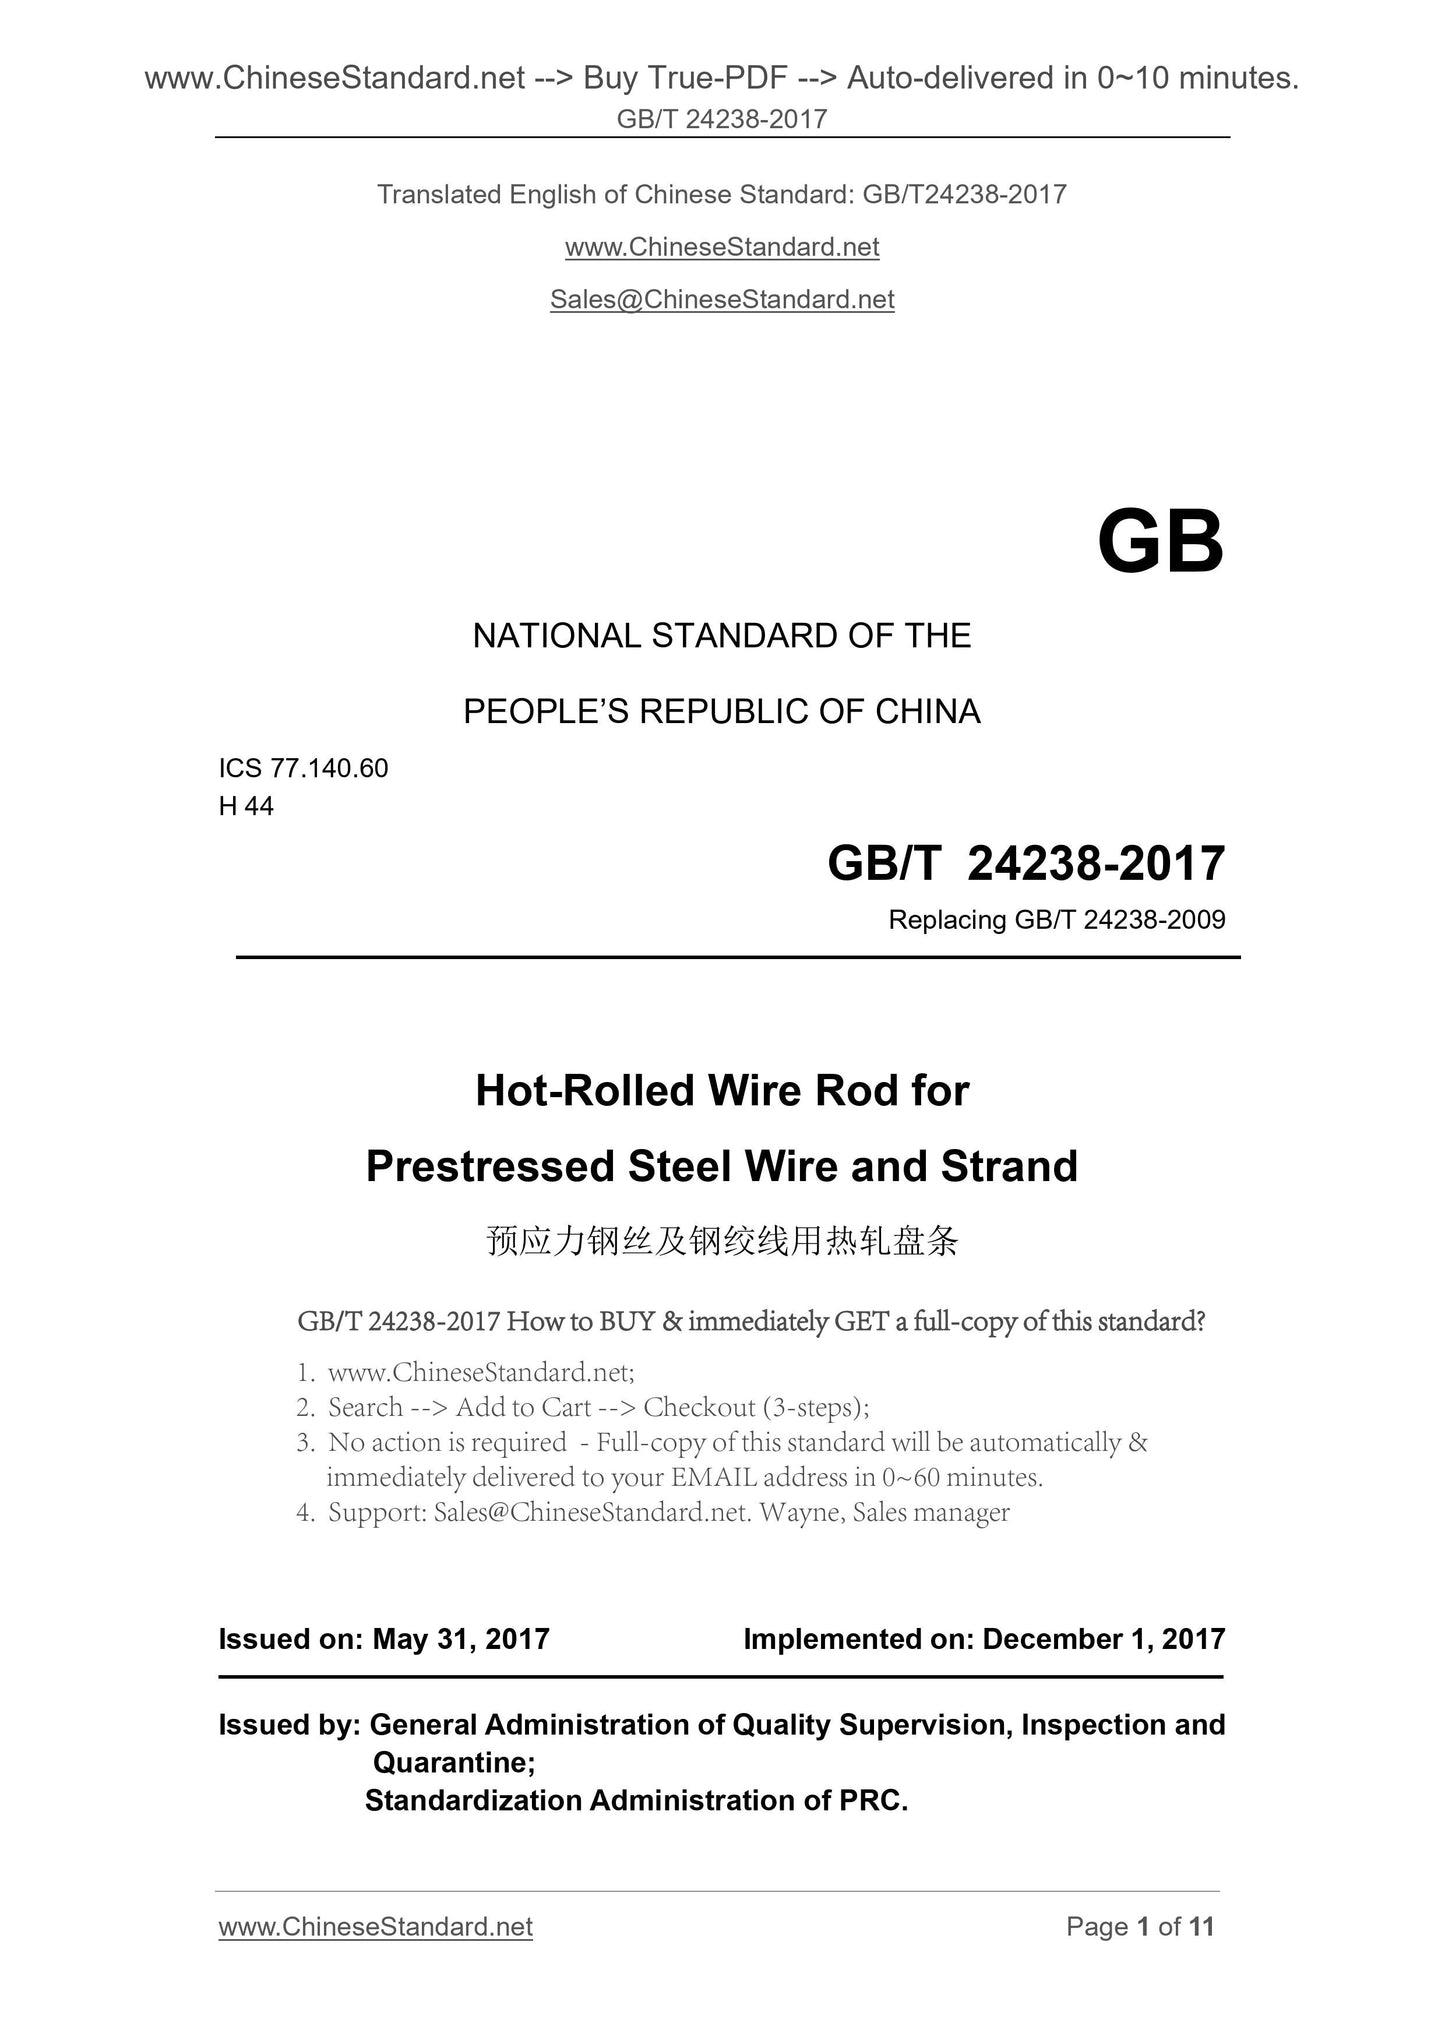 GB/T 24238-2017 Page 1